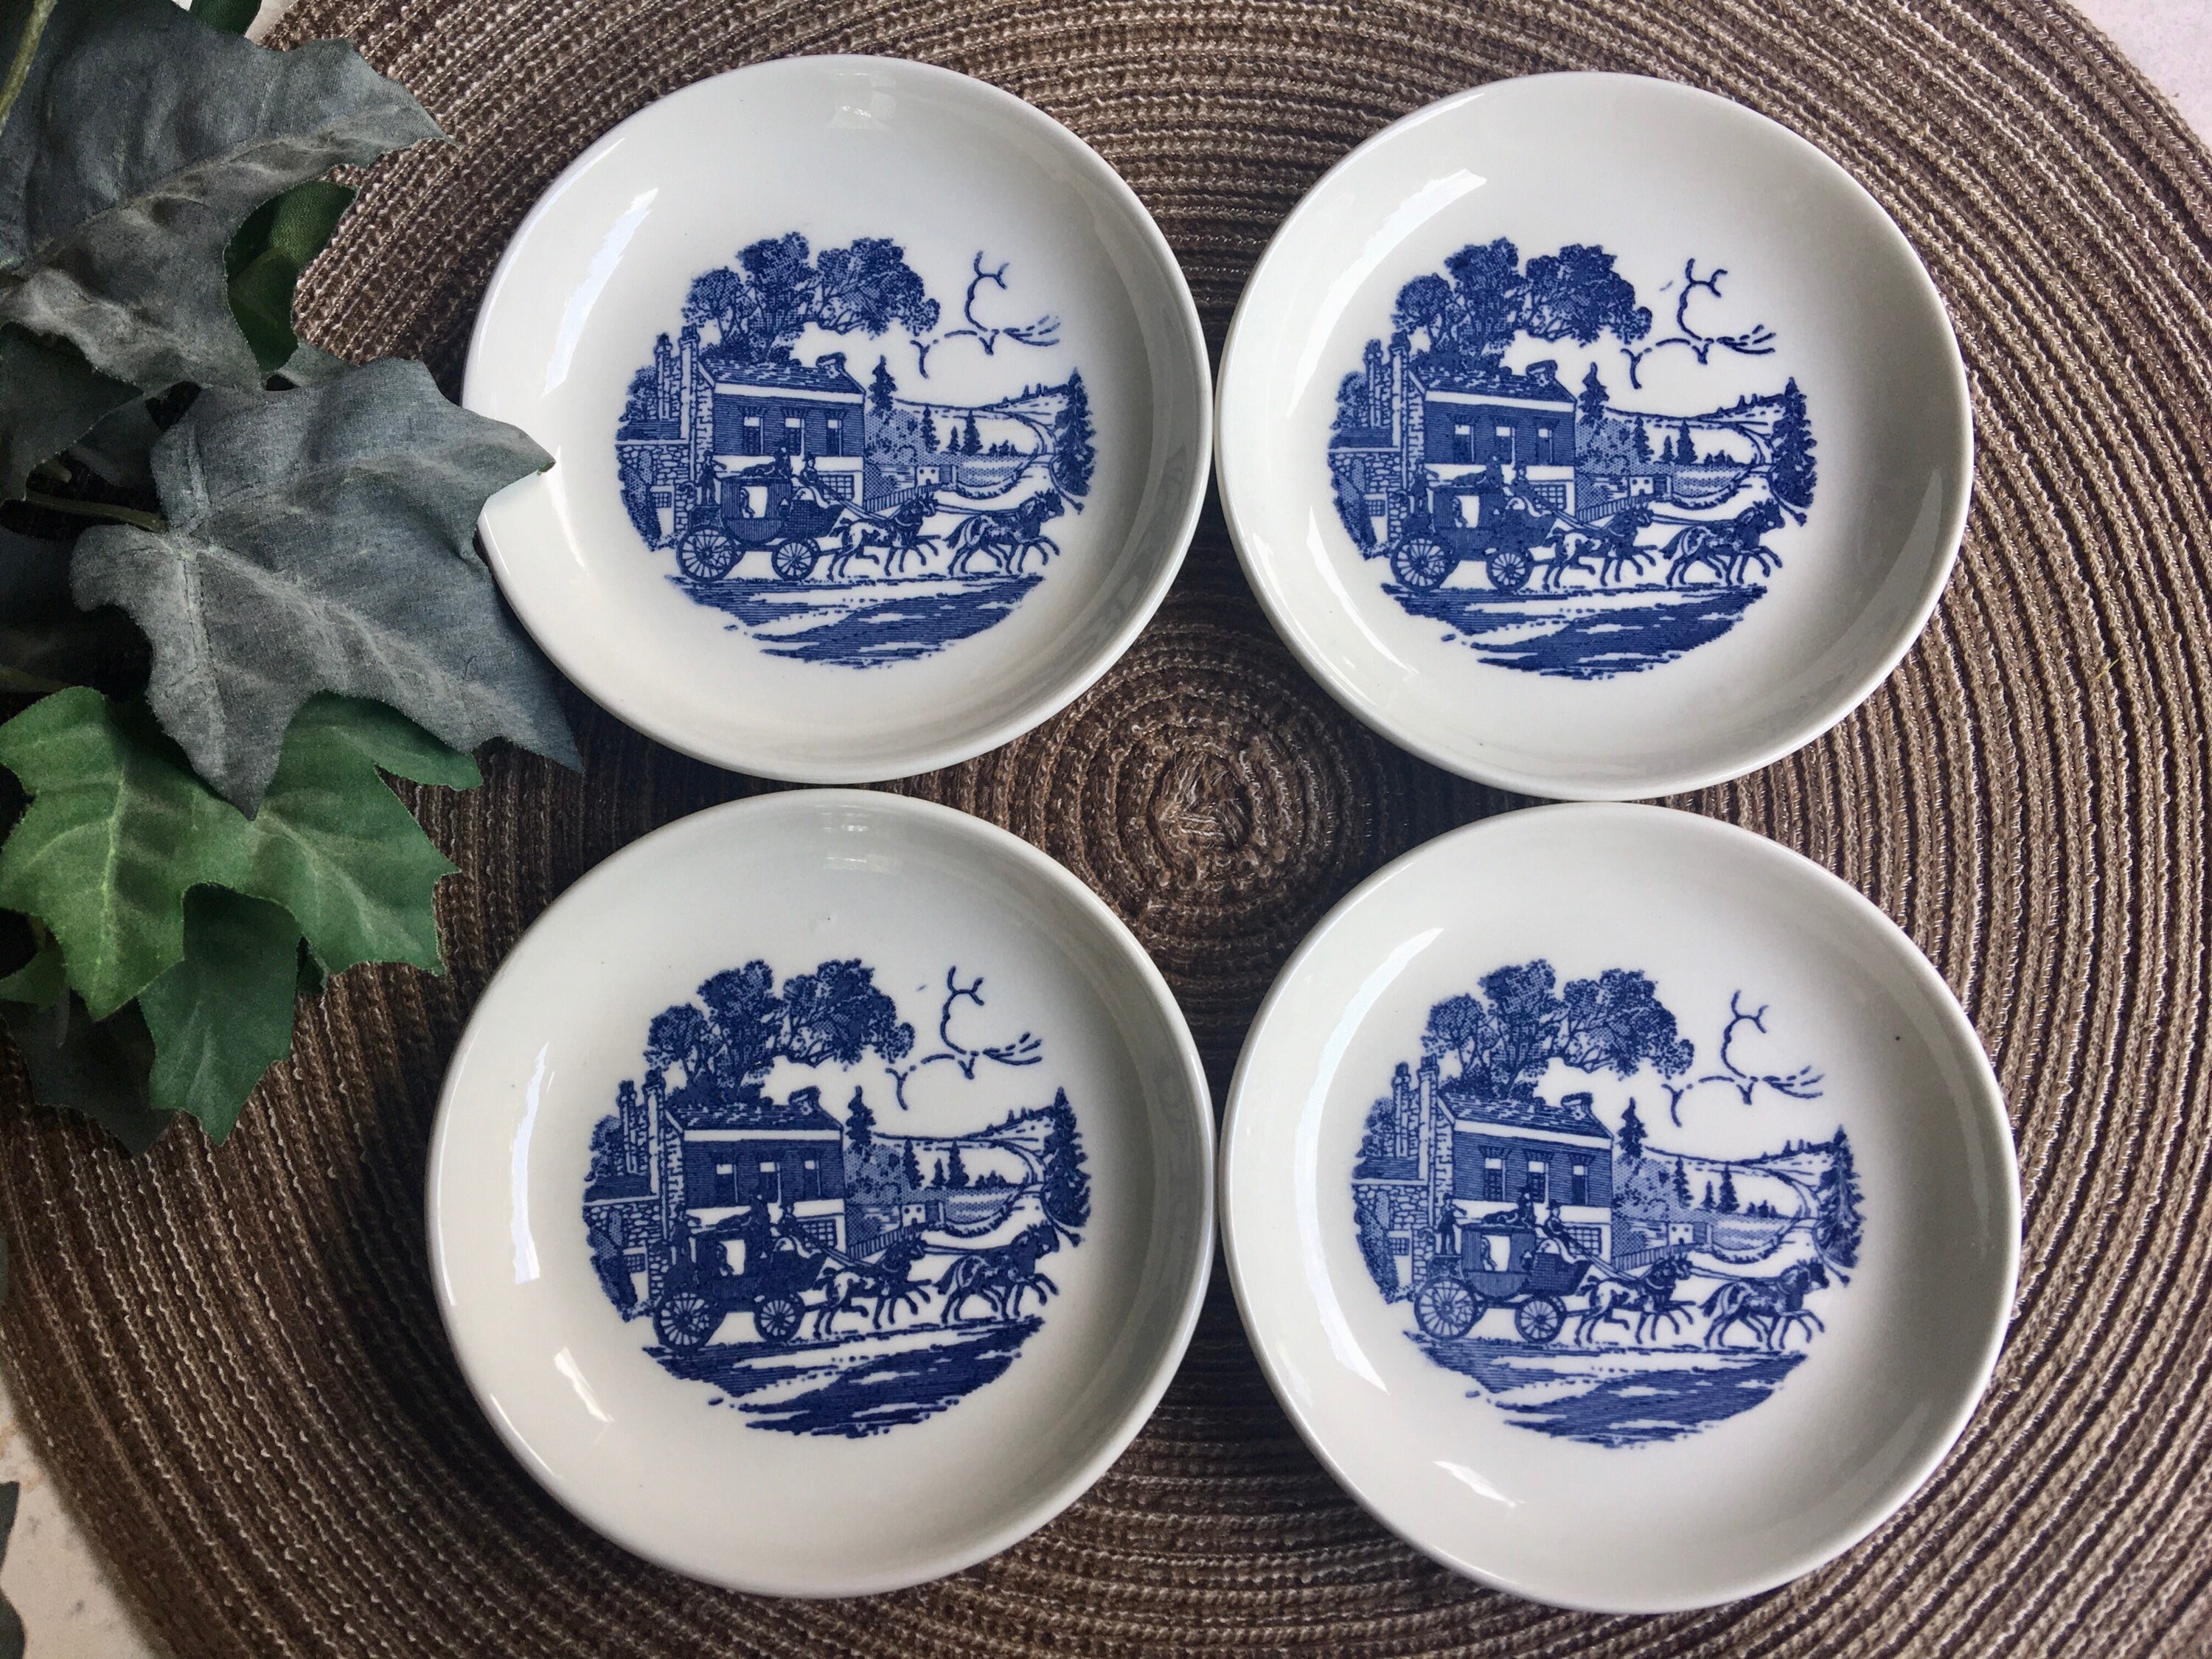 Blue and White Home Interiors - Floral Coasters. New England Style